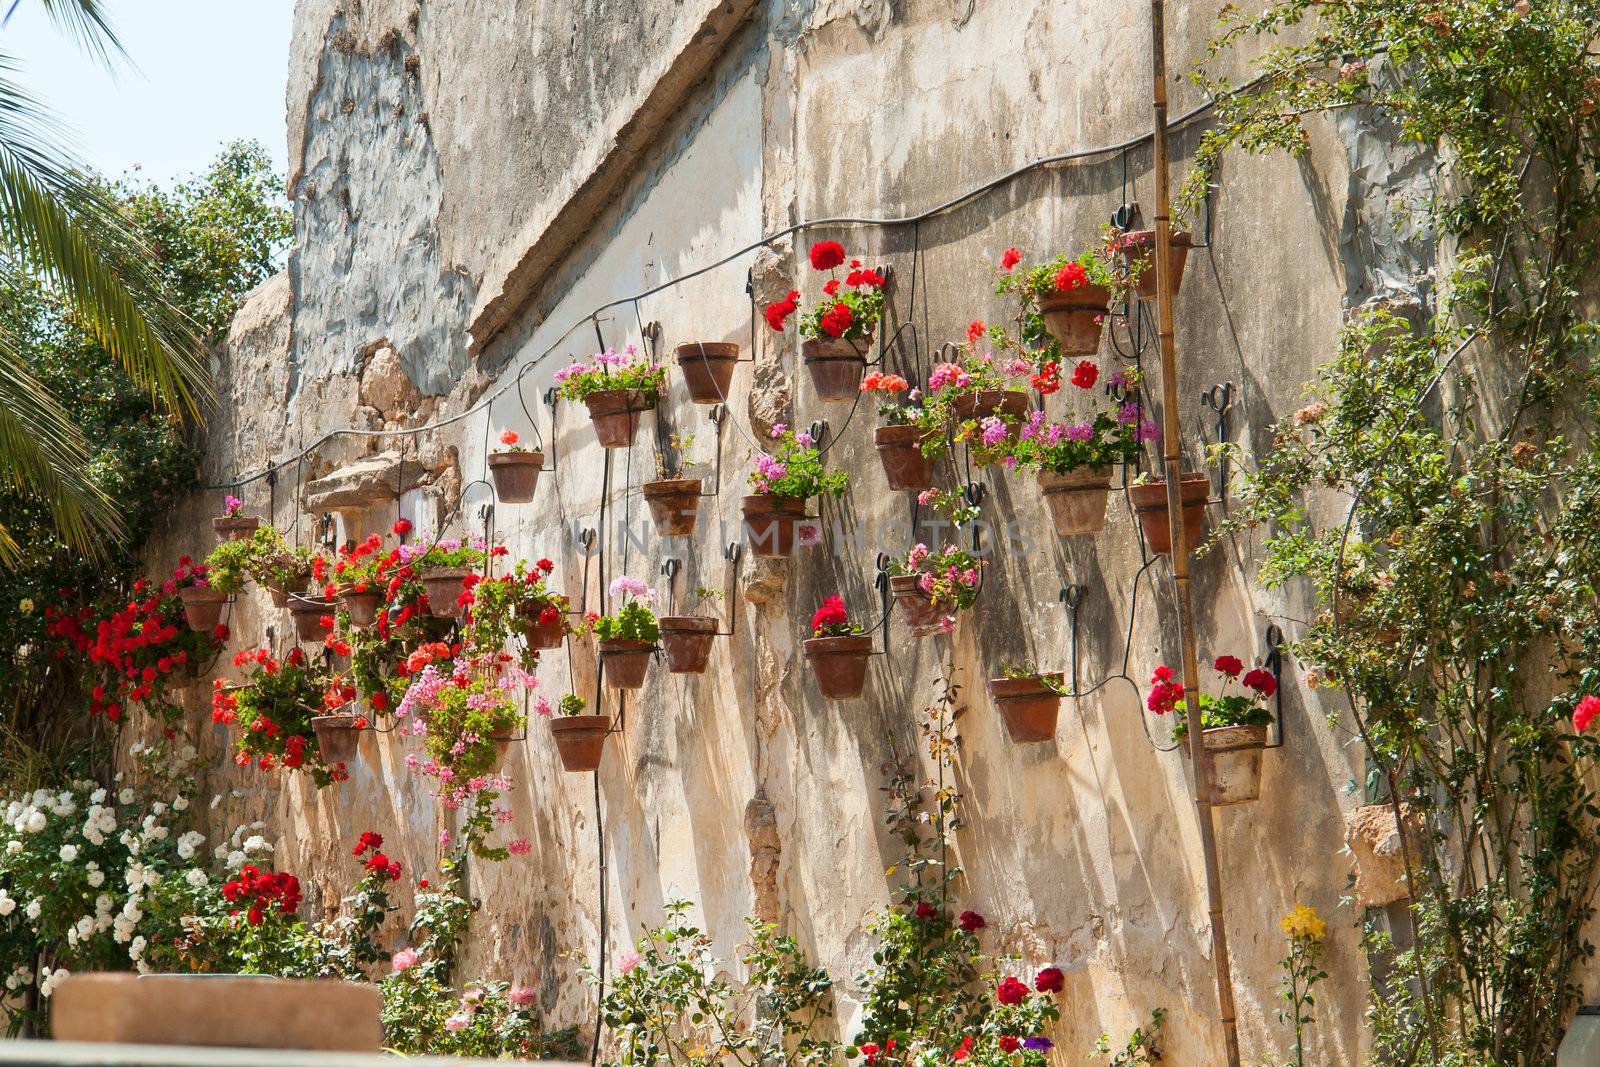 Typical wall planter pots  with Geranium hanged on a wall Tuscany Italy style